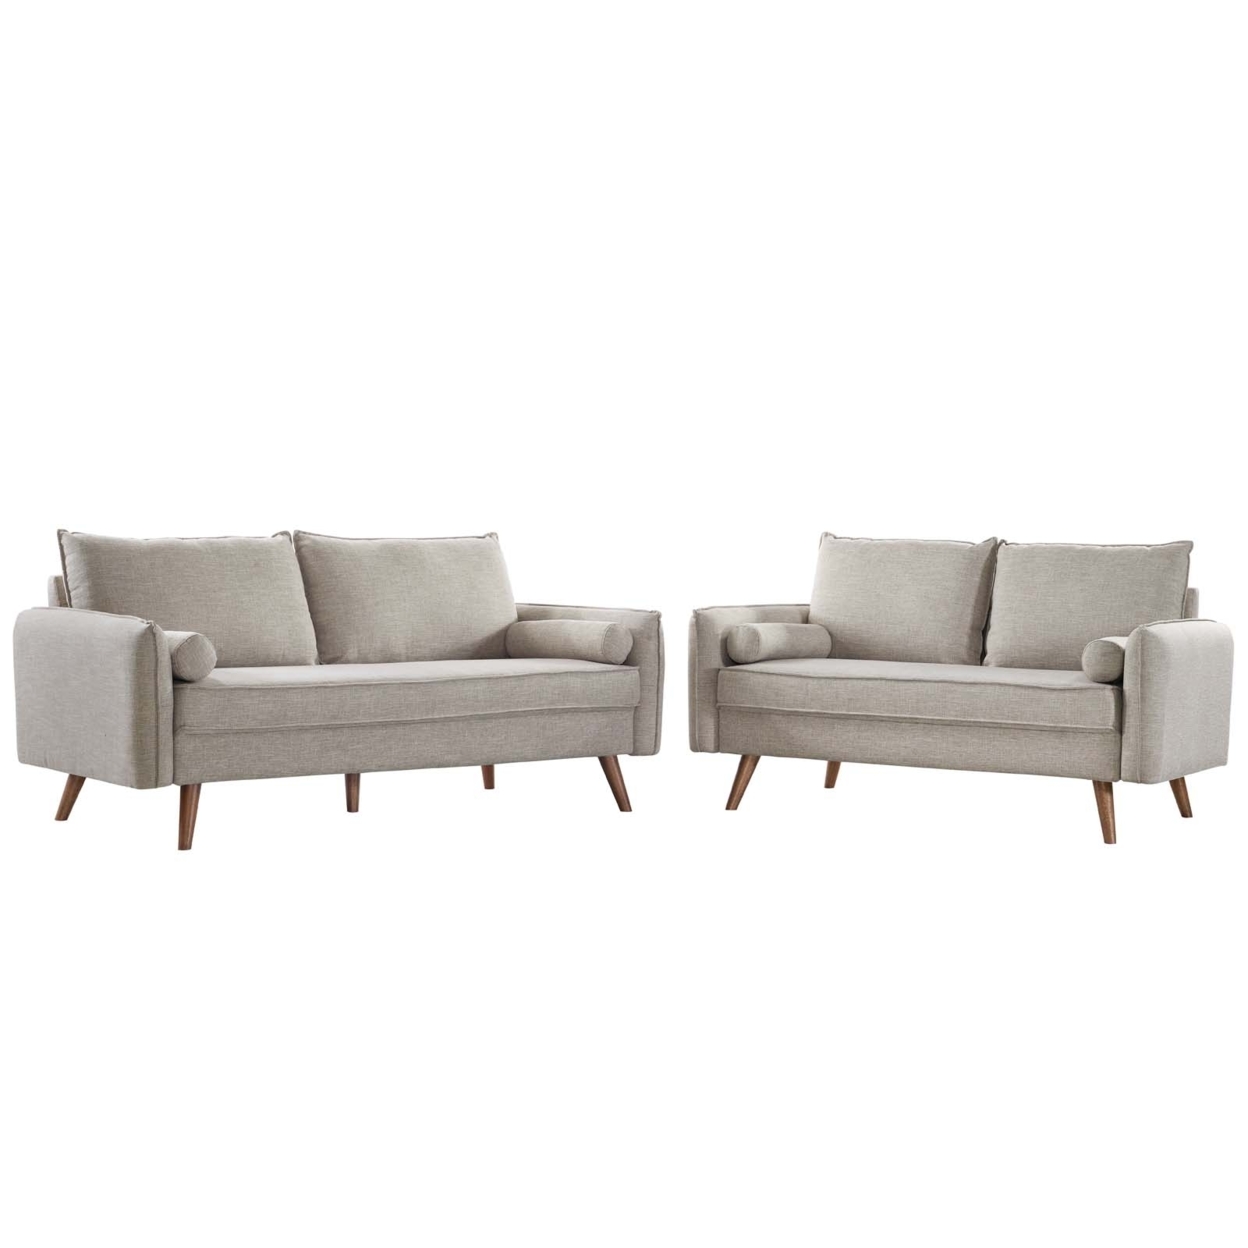 Revive Upholstered Fabric Sofa And Loveseat Set, Beige